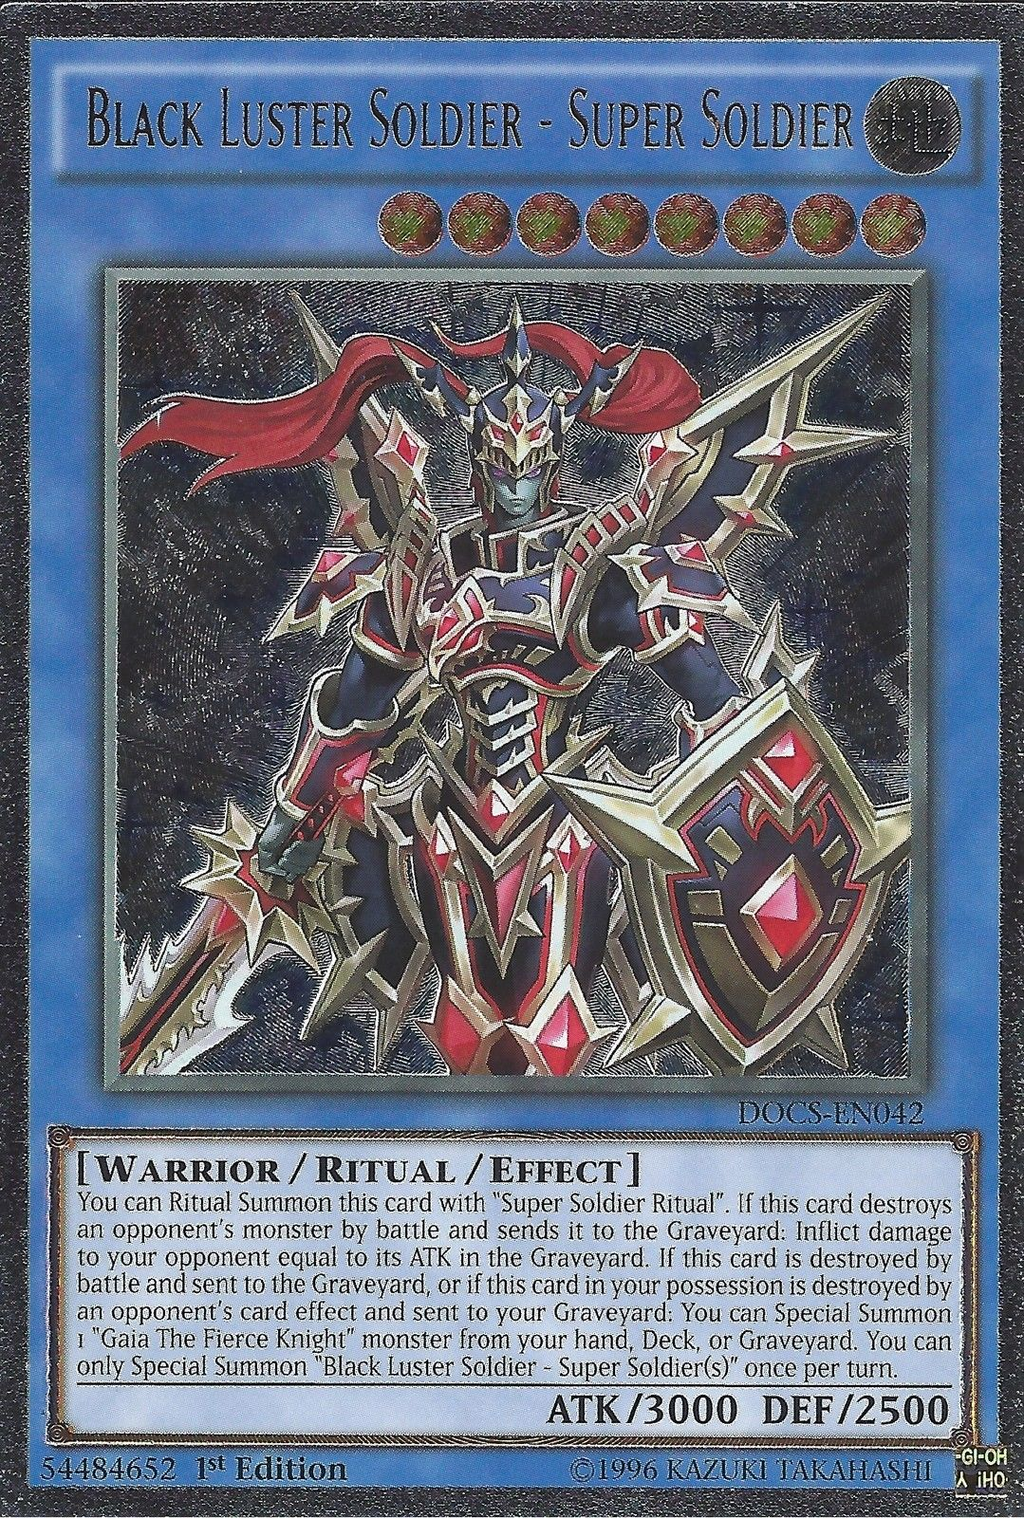 Toon Black Luster Soldier - TOCH-EN001 - Ultra Rare 1st Edition